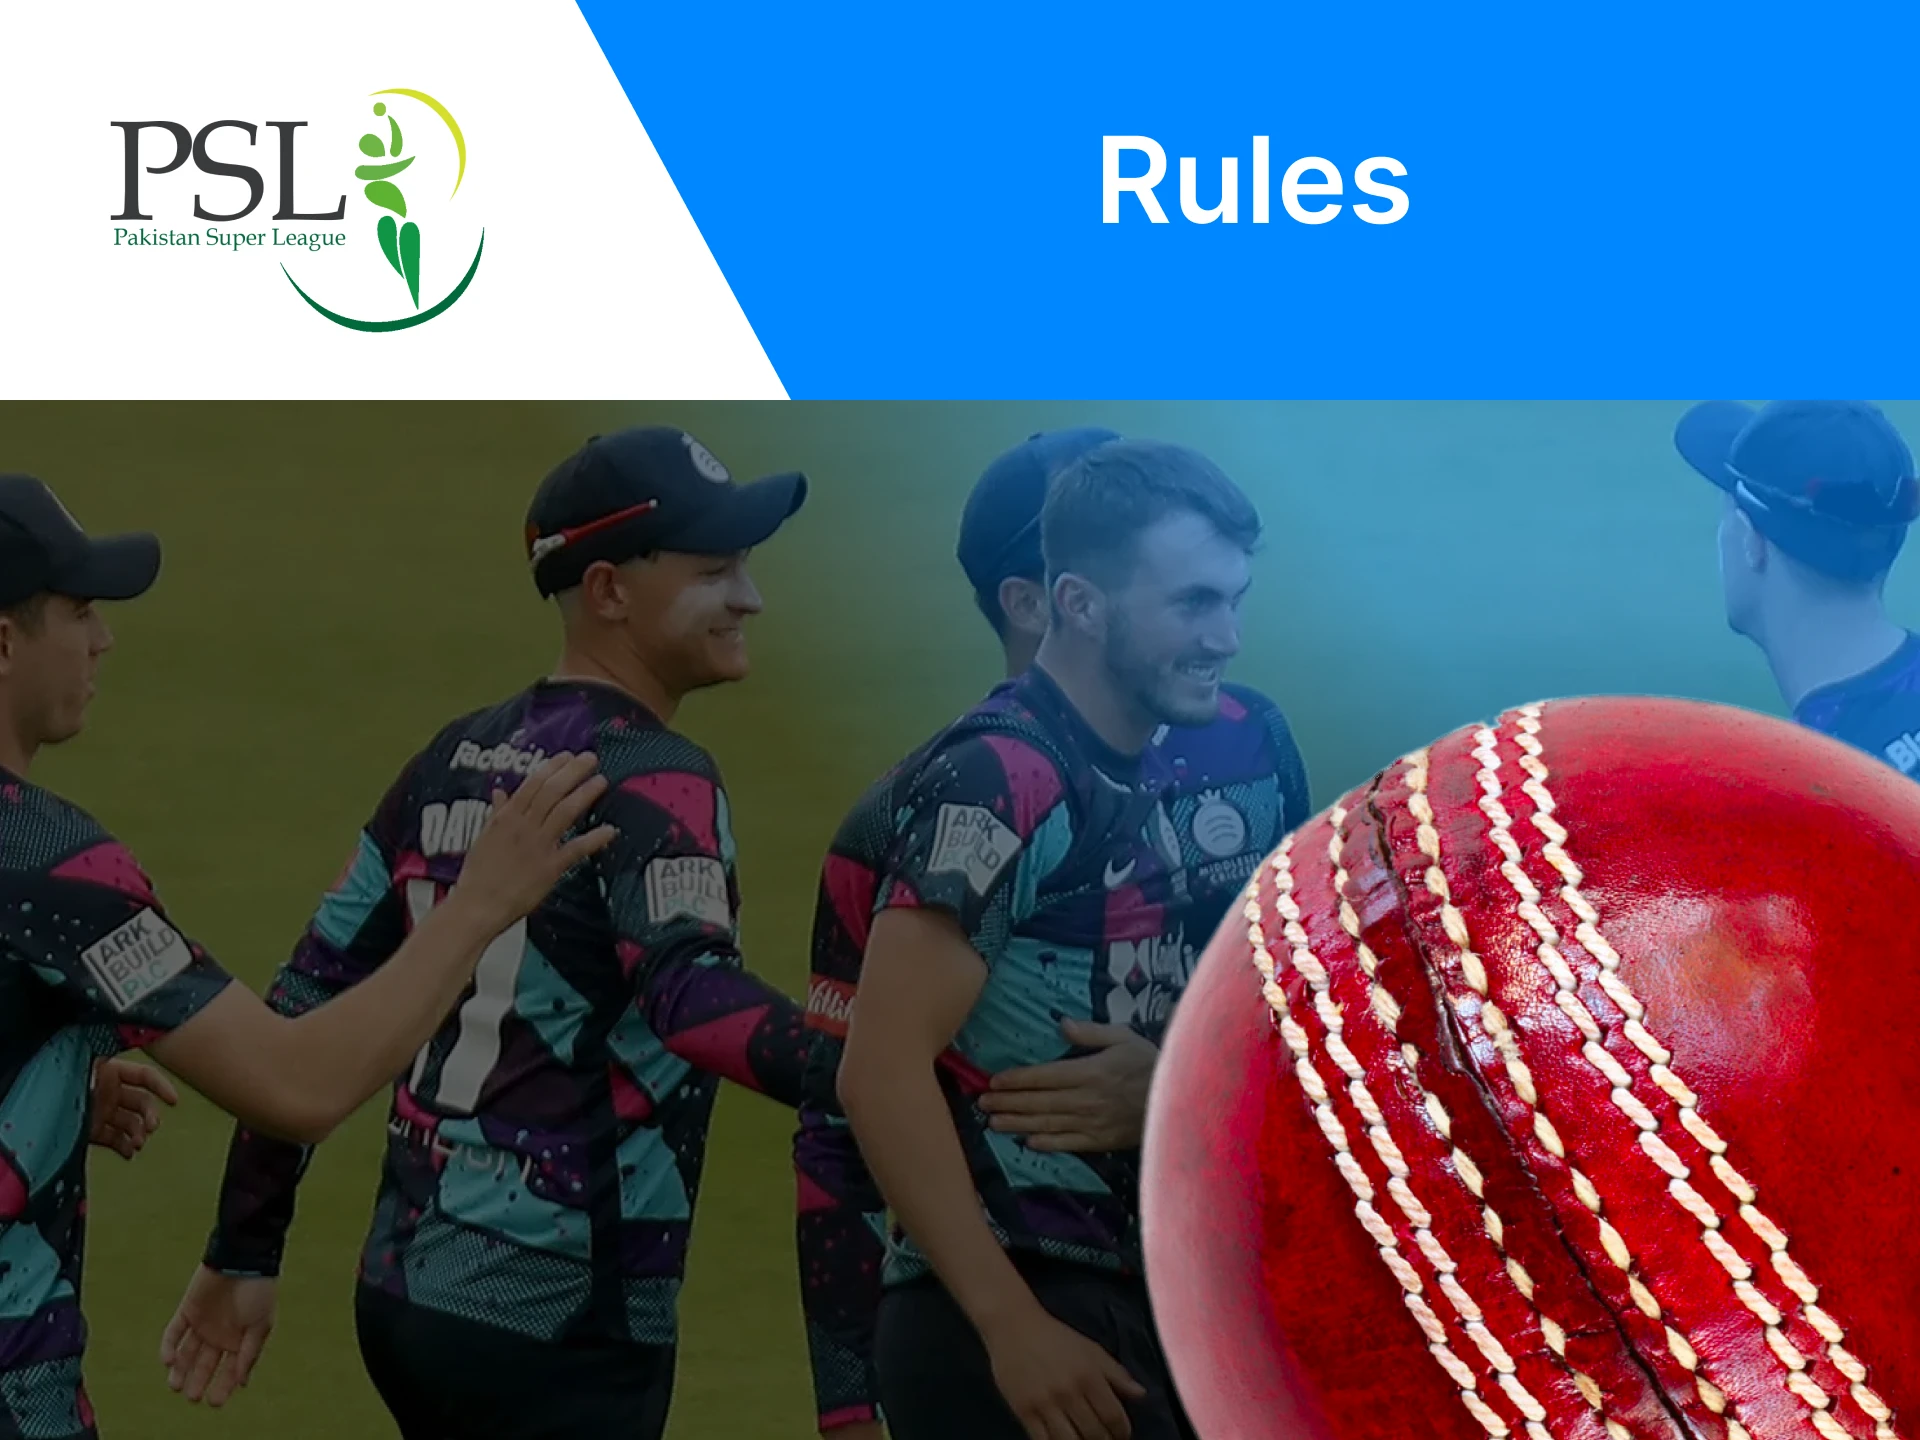 The PSL tournament has specific rules as well.